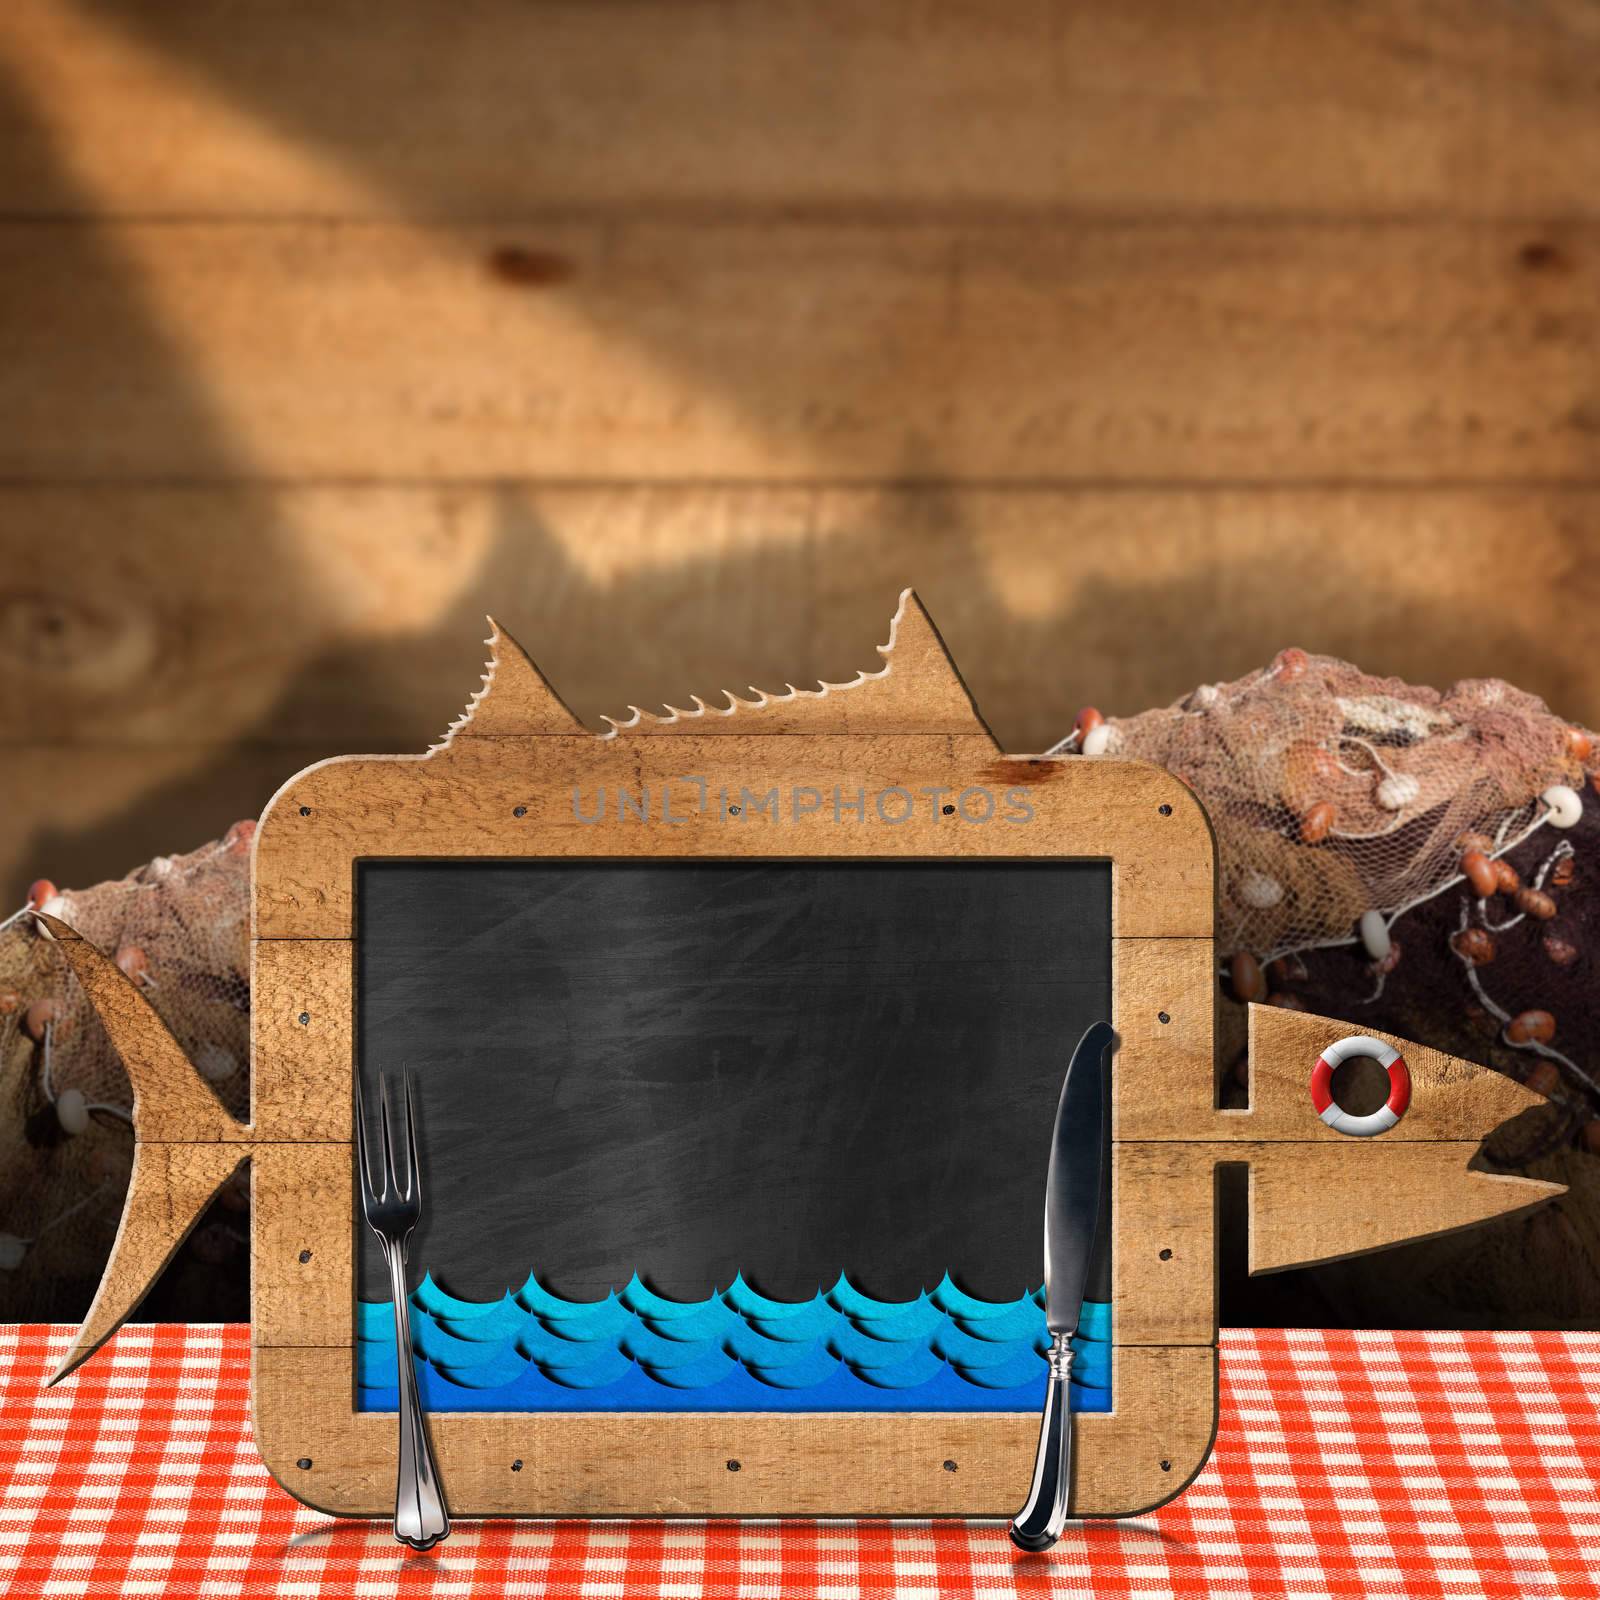 Blackboard in the shape of fish with blue waves and silver cutlery on a table with checkered tablecloth and fishing nets